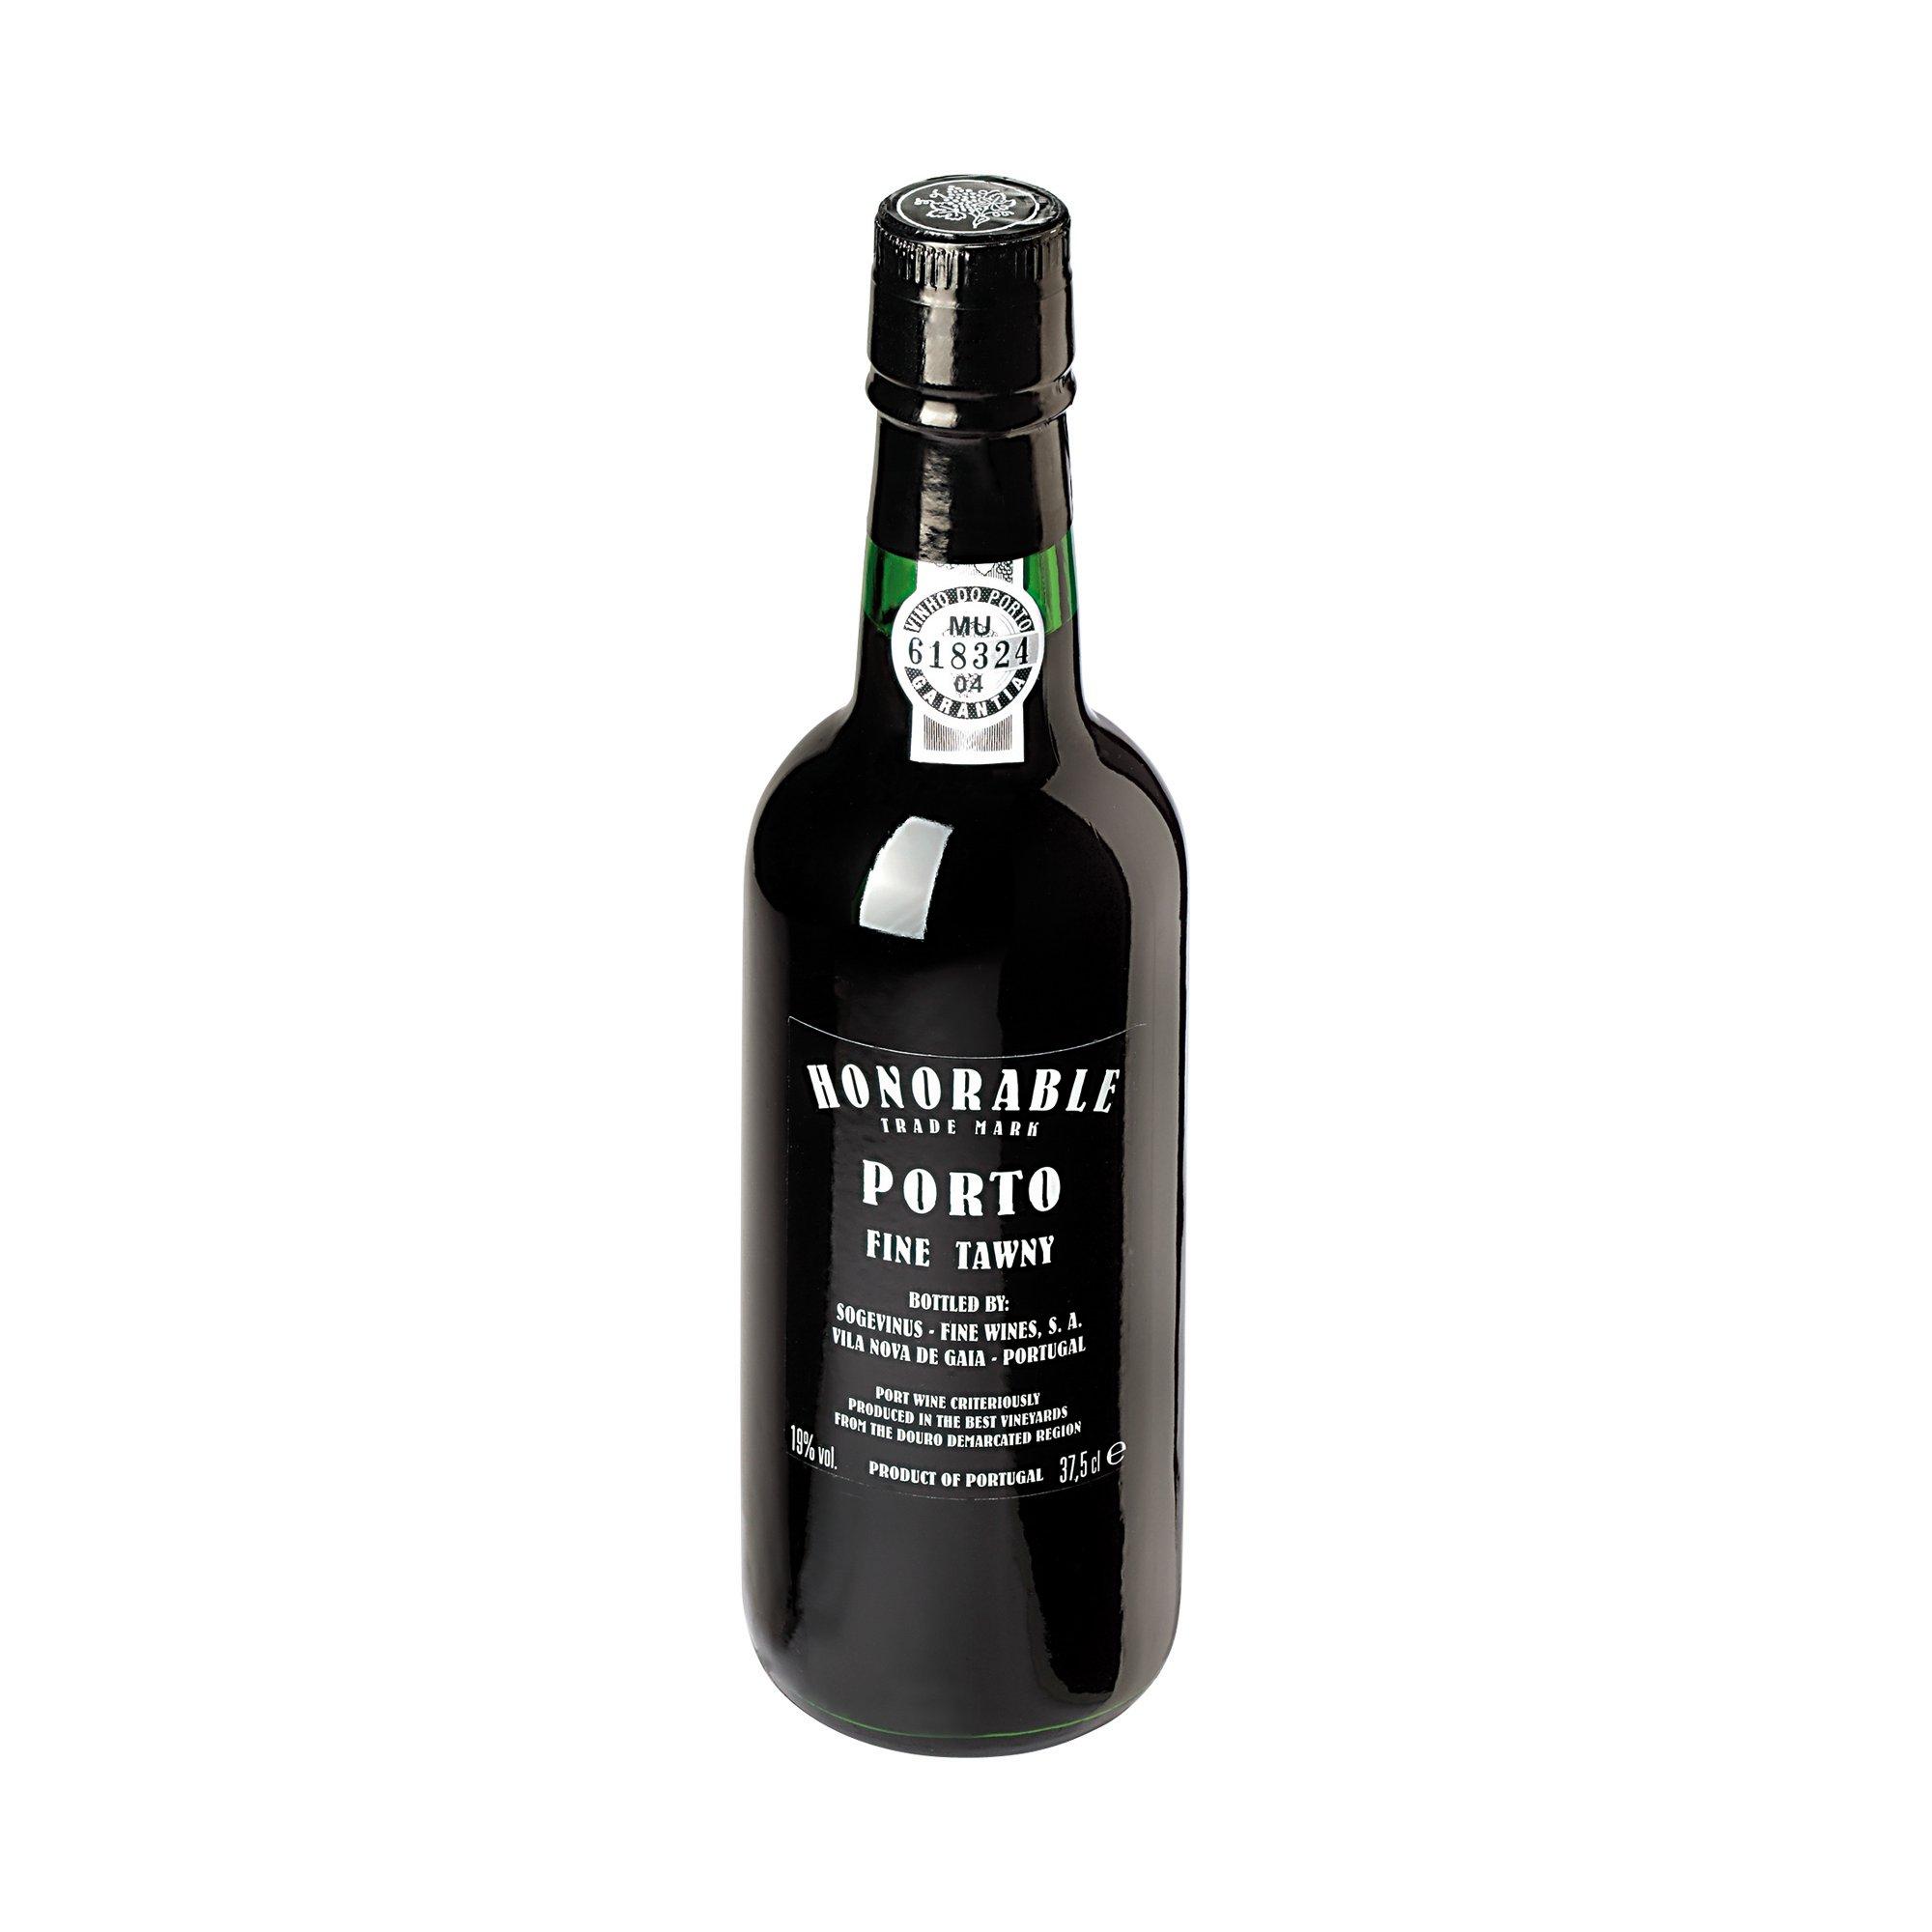 Image of Honorable Porto fine Tawny - 37.5 cl